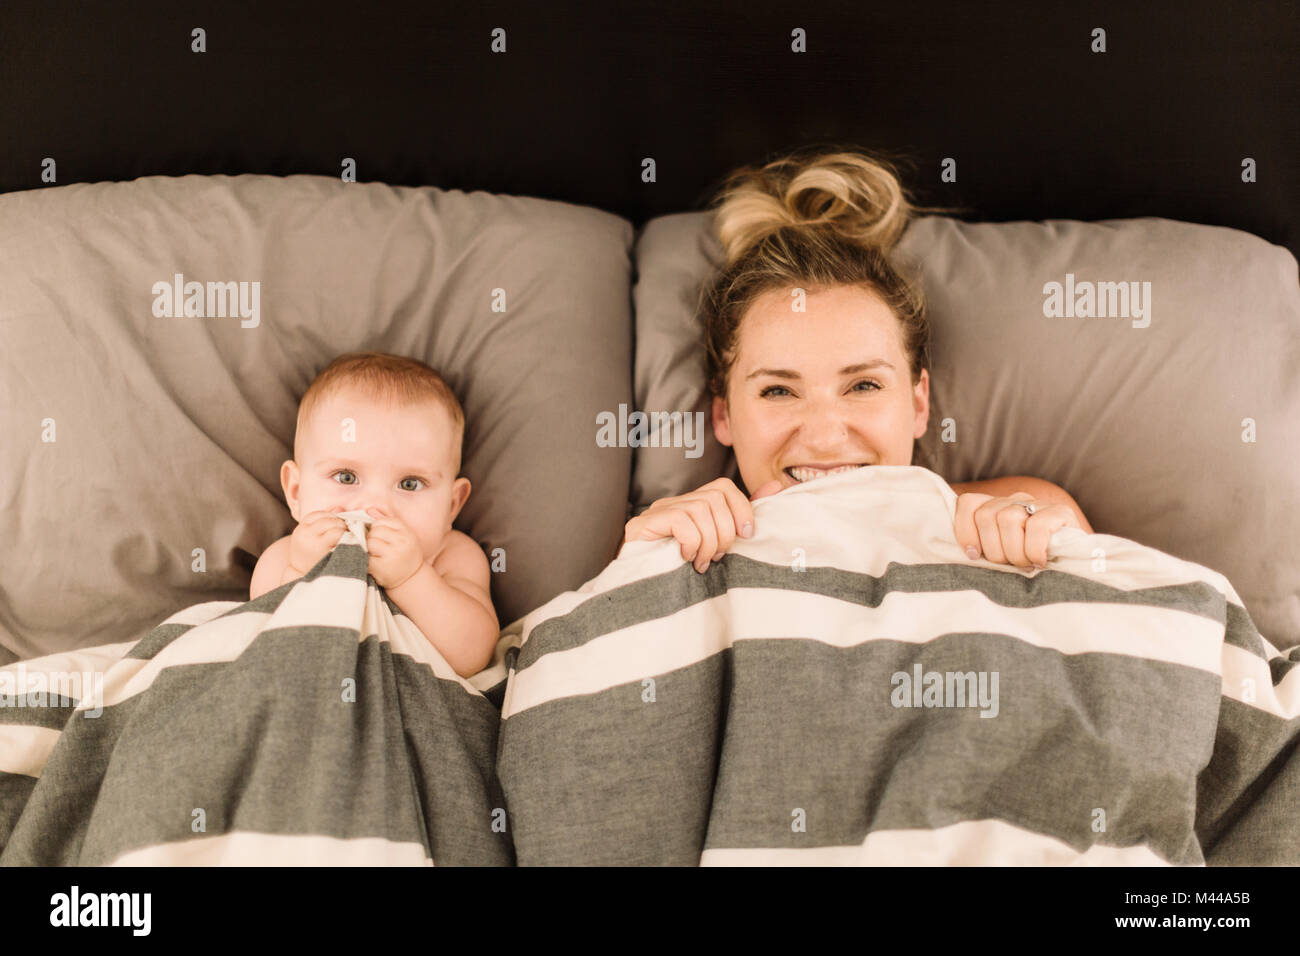 Portrait of woman lying in bed under duvet with baby daughter, overhead view Stock Photo